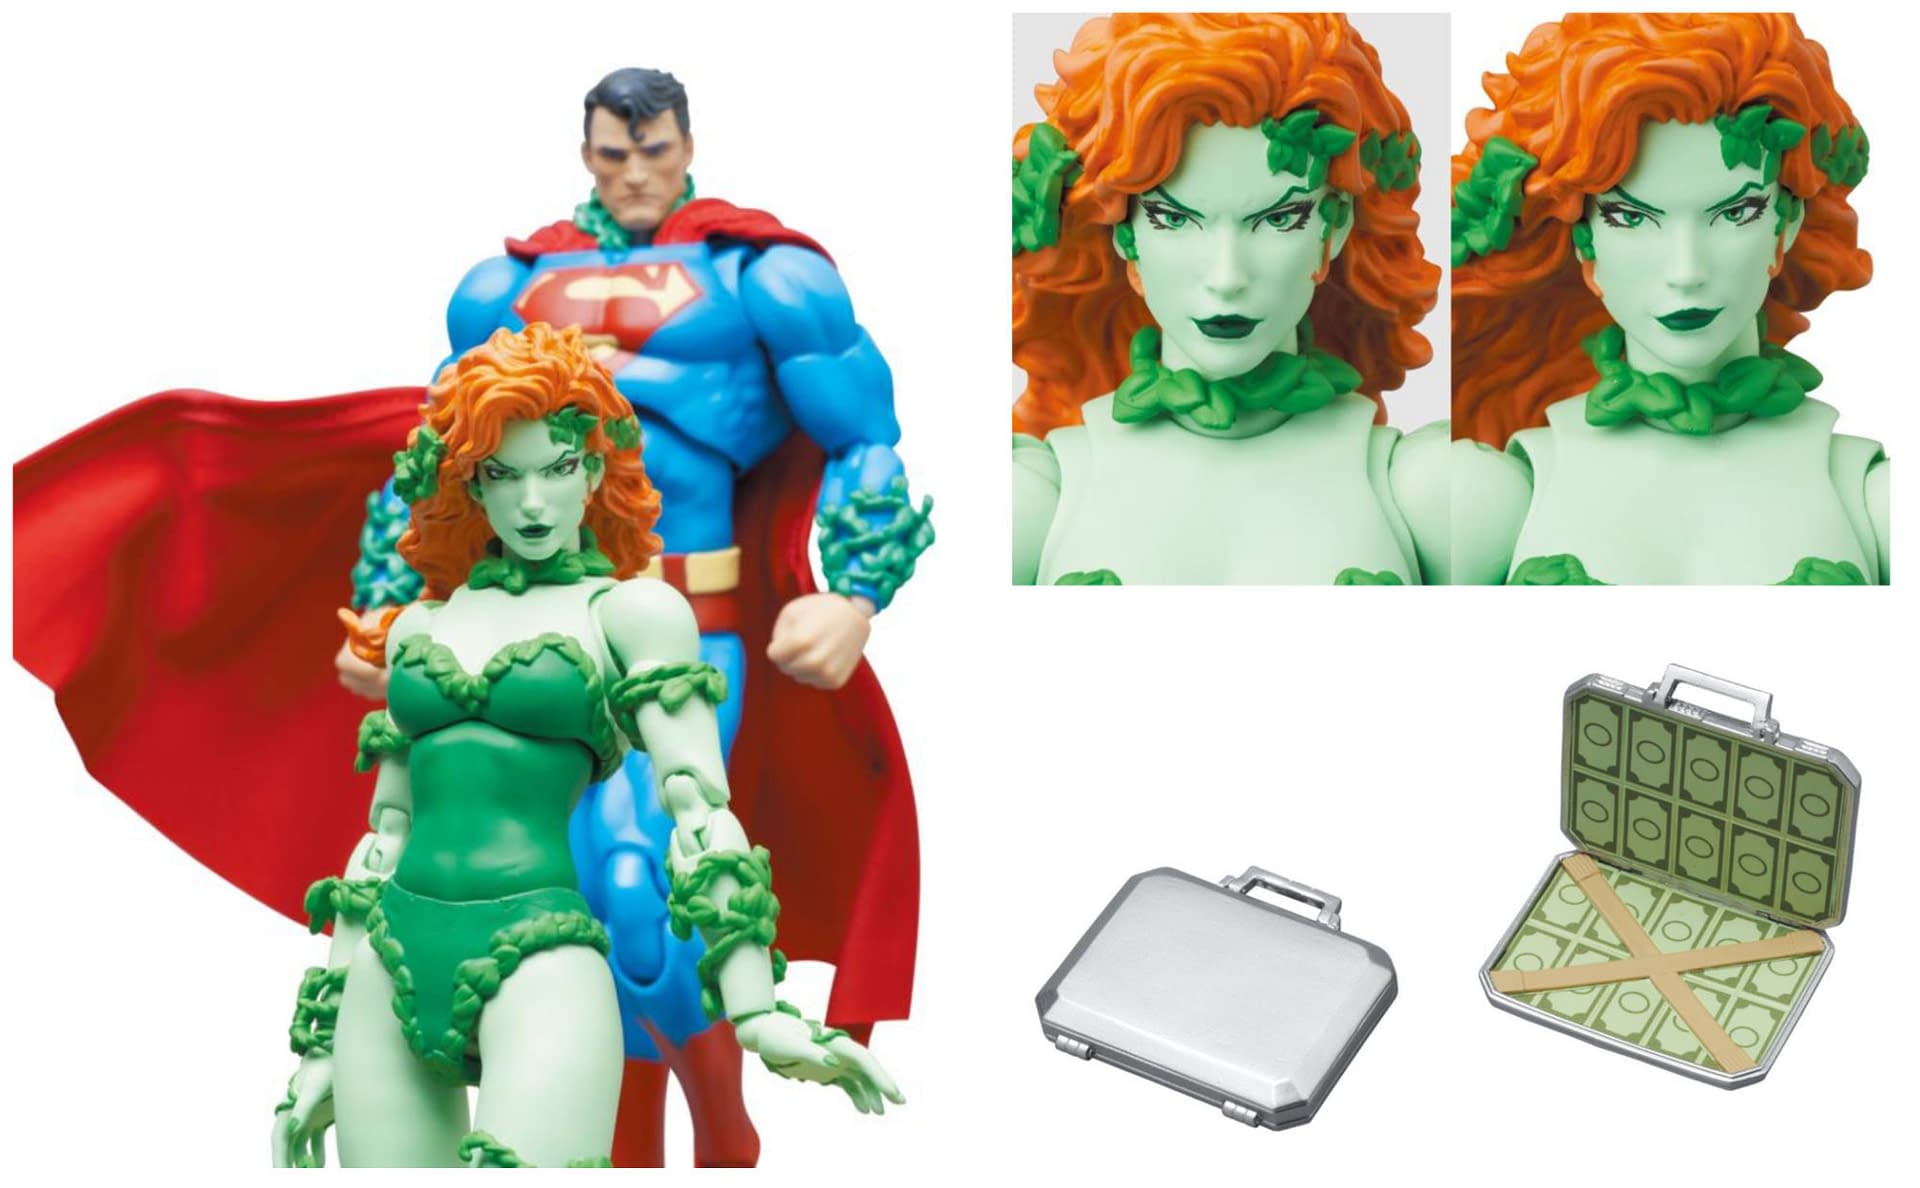 Batman: Hush Poison Ivy Arrives with New DC Comics MAFEX Release